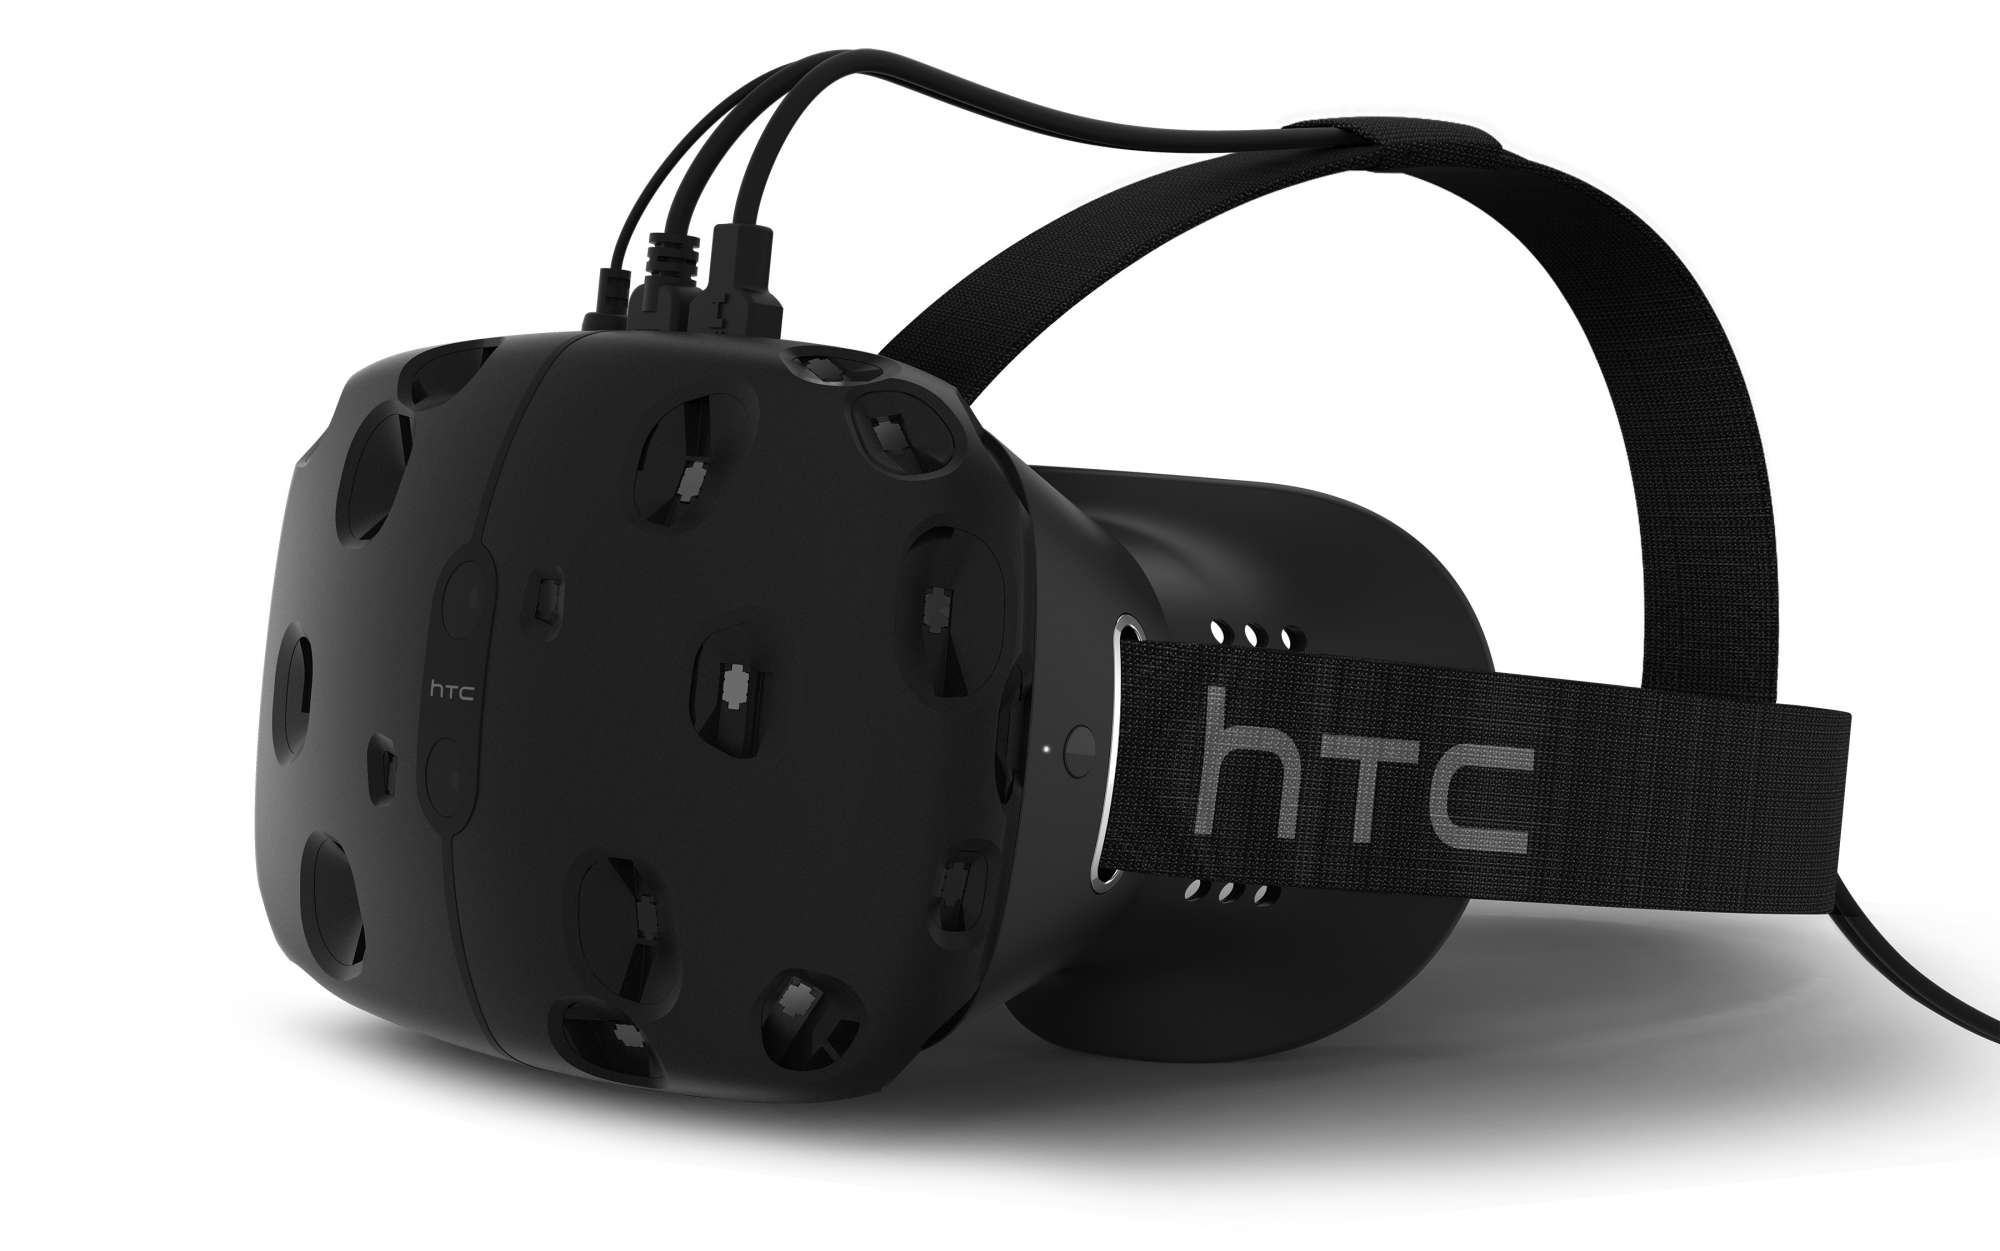 HTC Vive pre-orders to commence on February 29